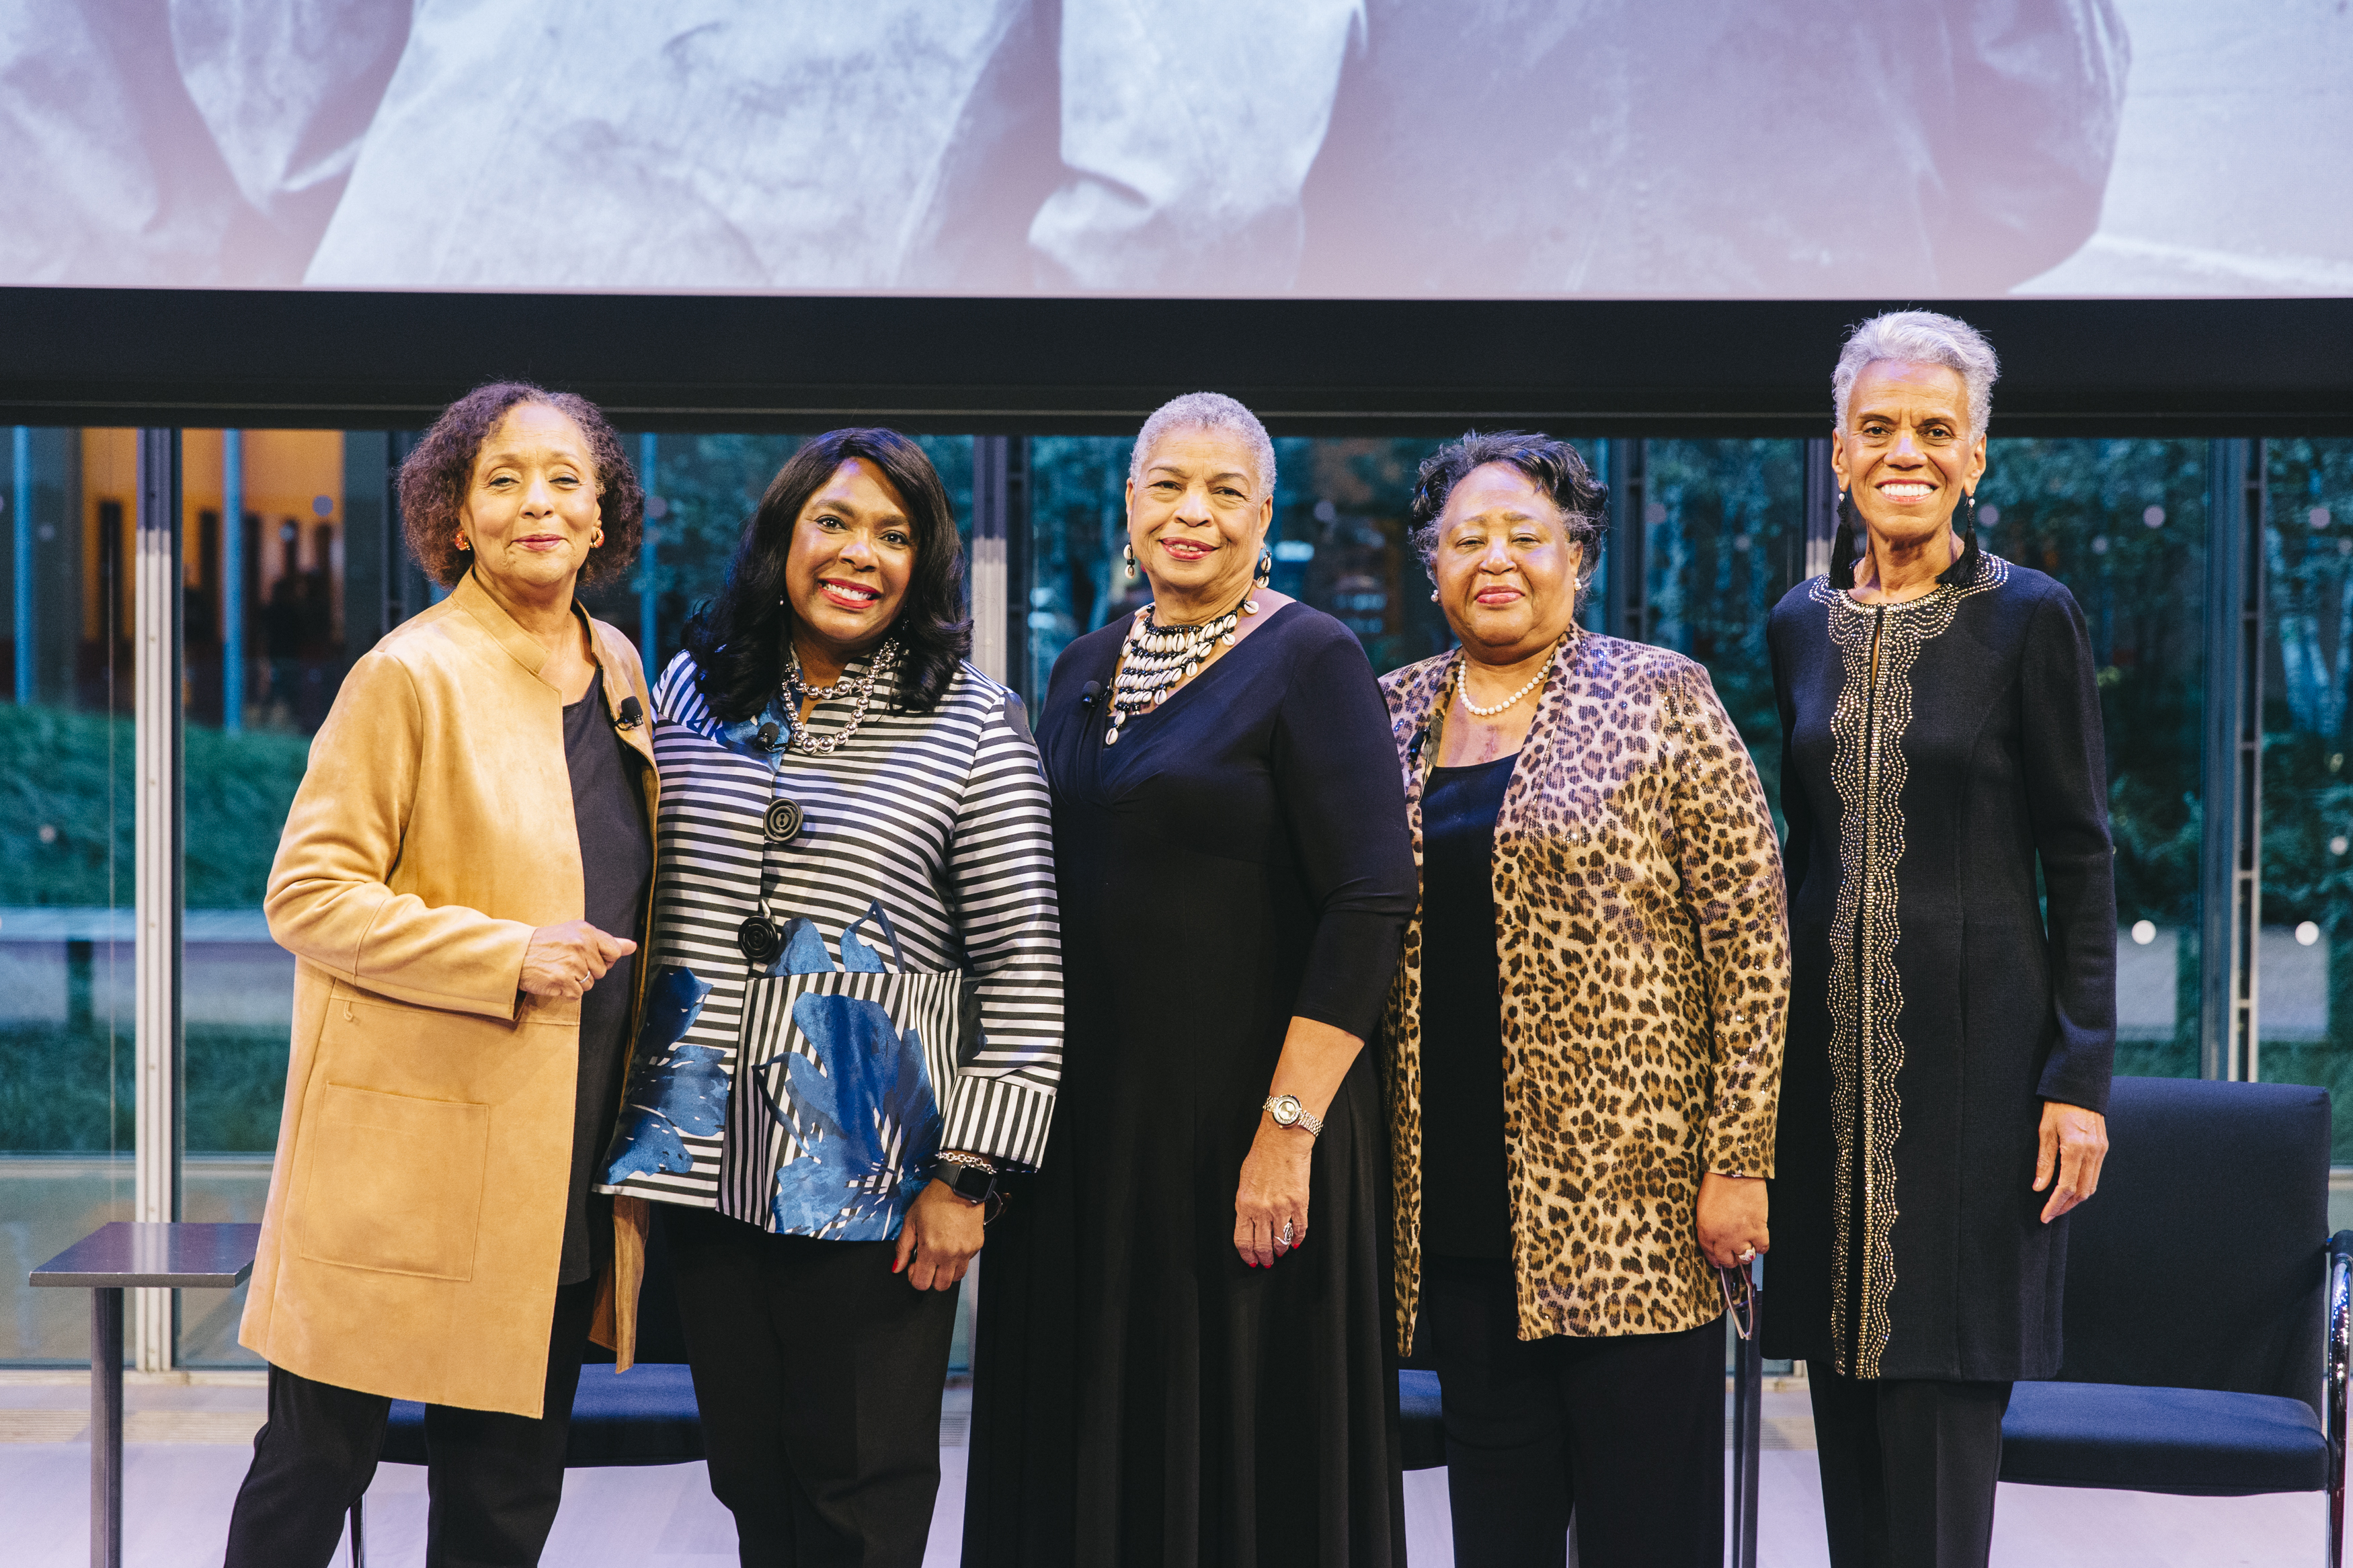 From left: Moderator Carol Jenkins with speakers Rep. Terri A. Sewell, Priscilla Hancock Cooper, Joyce O'Neal, and Andrea Taylor. Image credit: Rowa Lee.